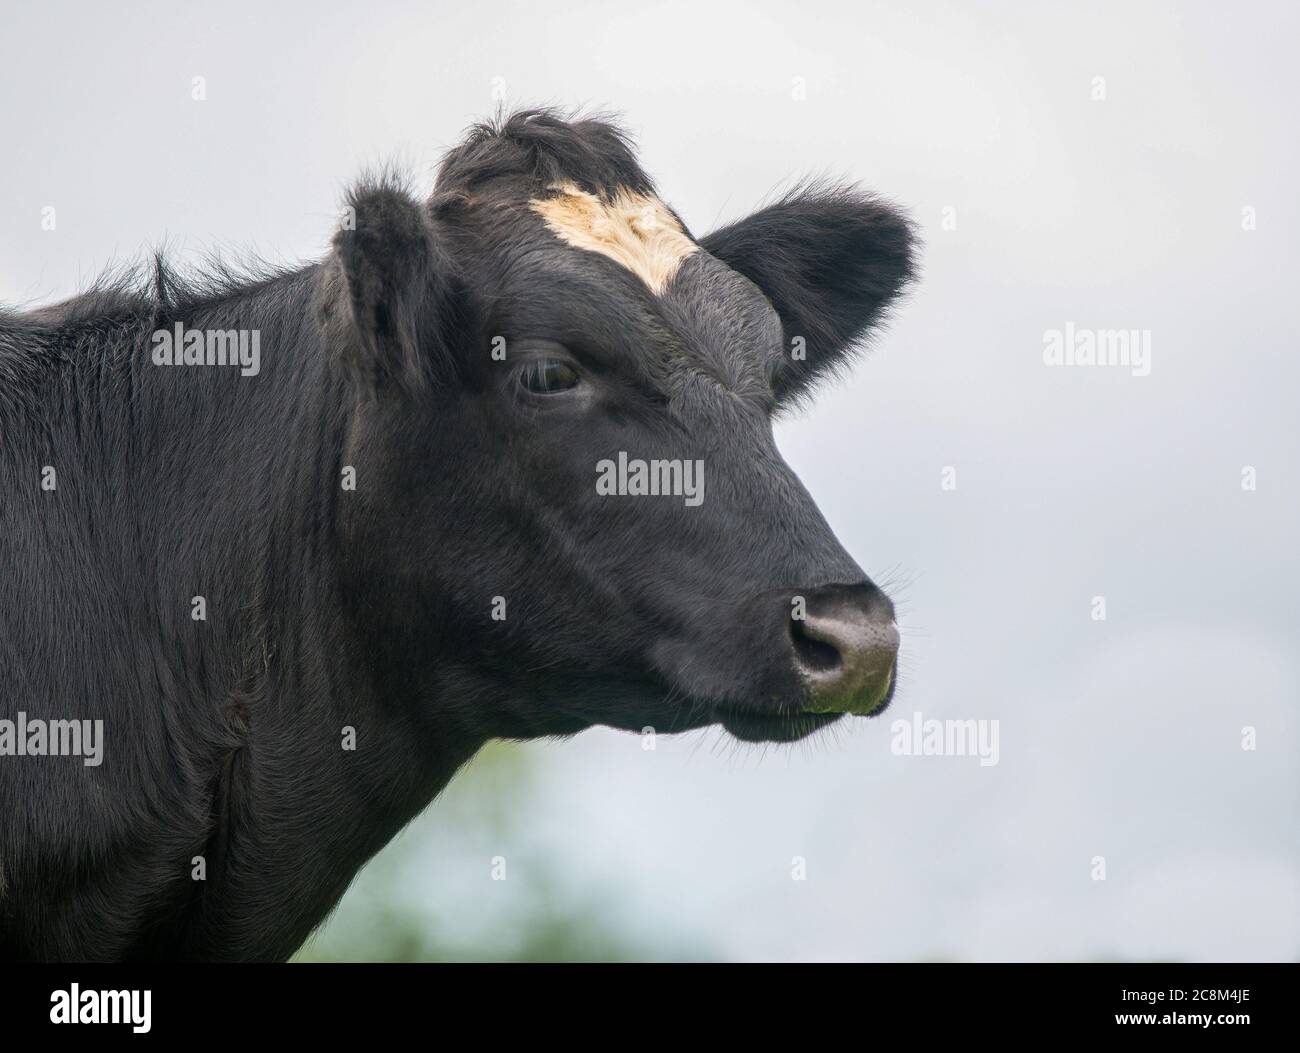 A close up photo of a black and white Cow in a field Stock Photo